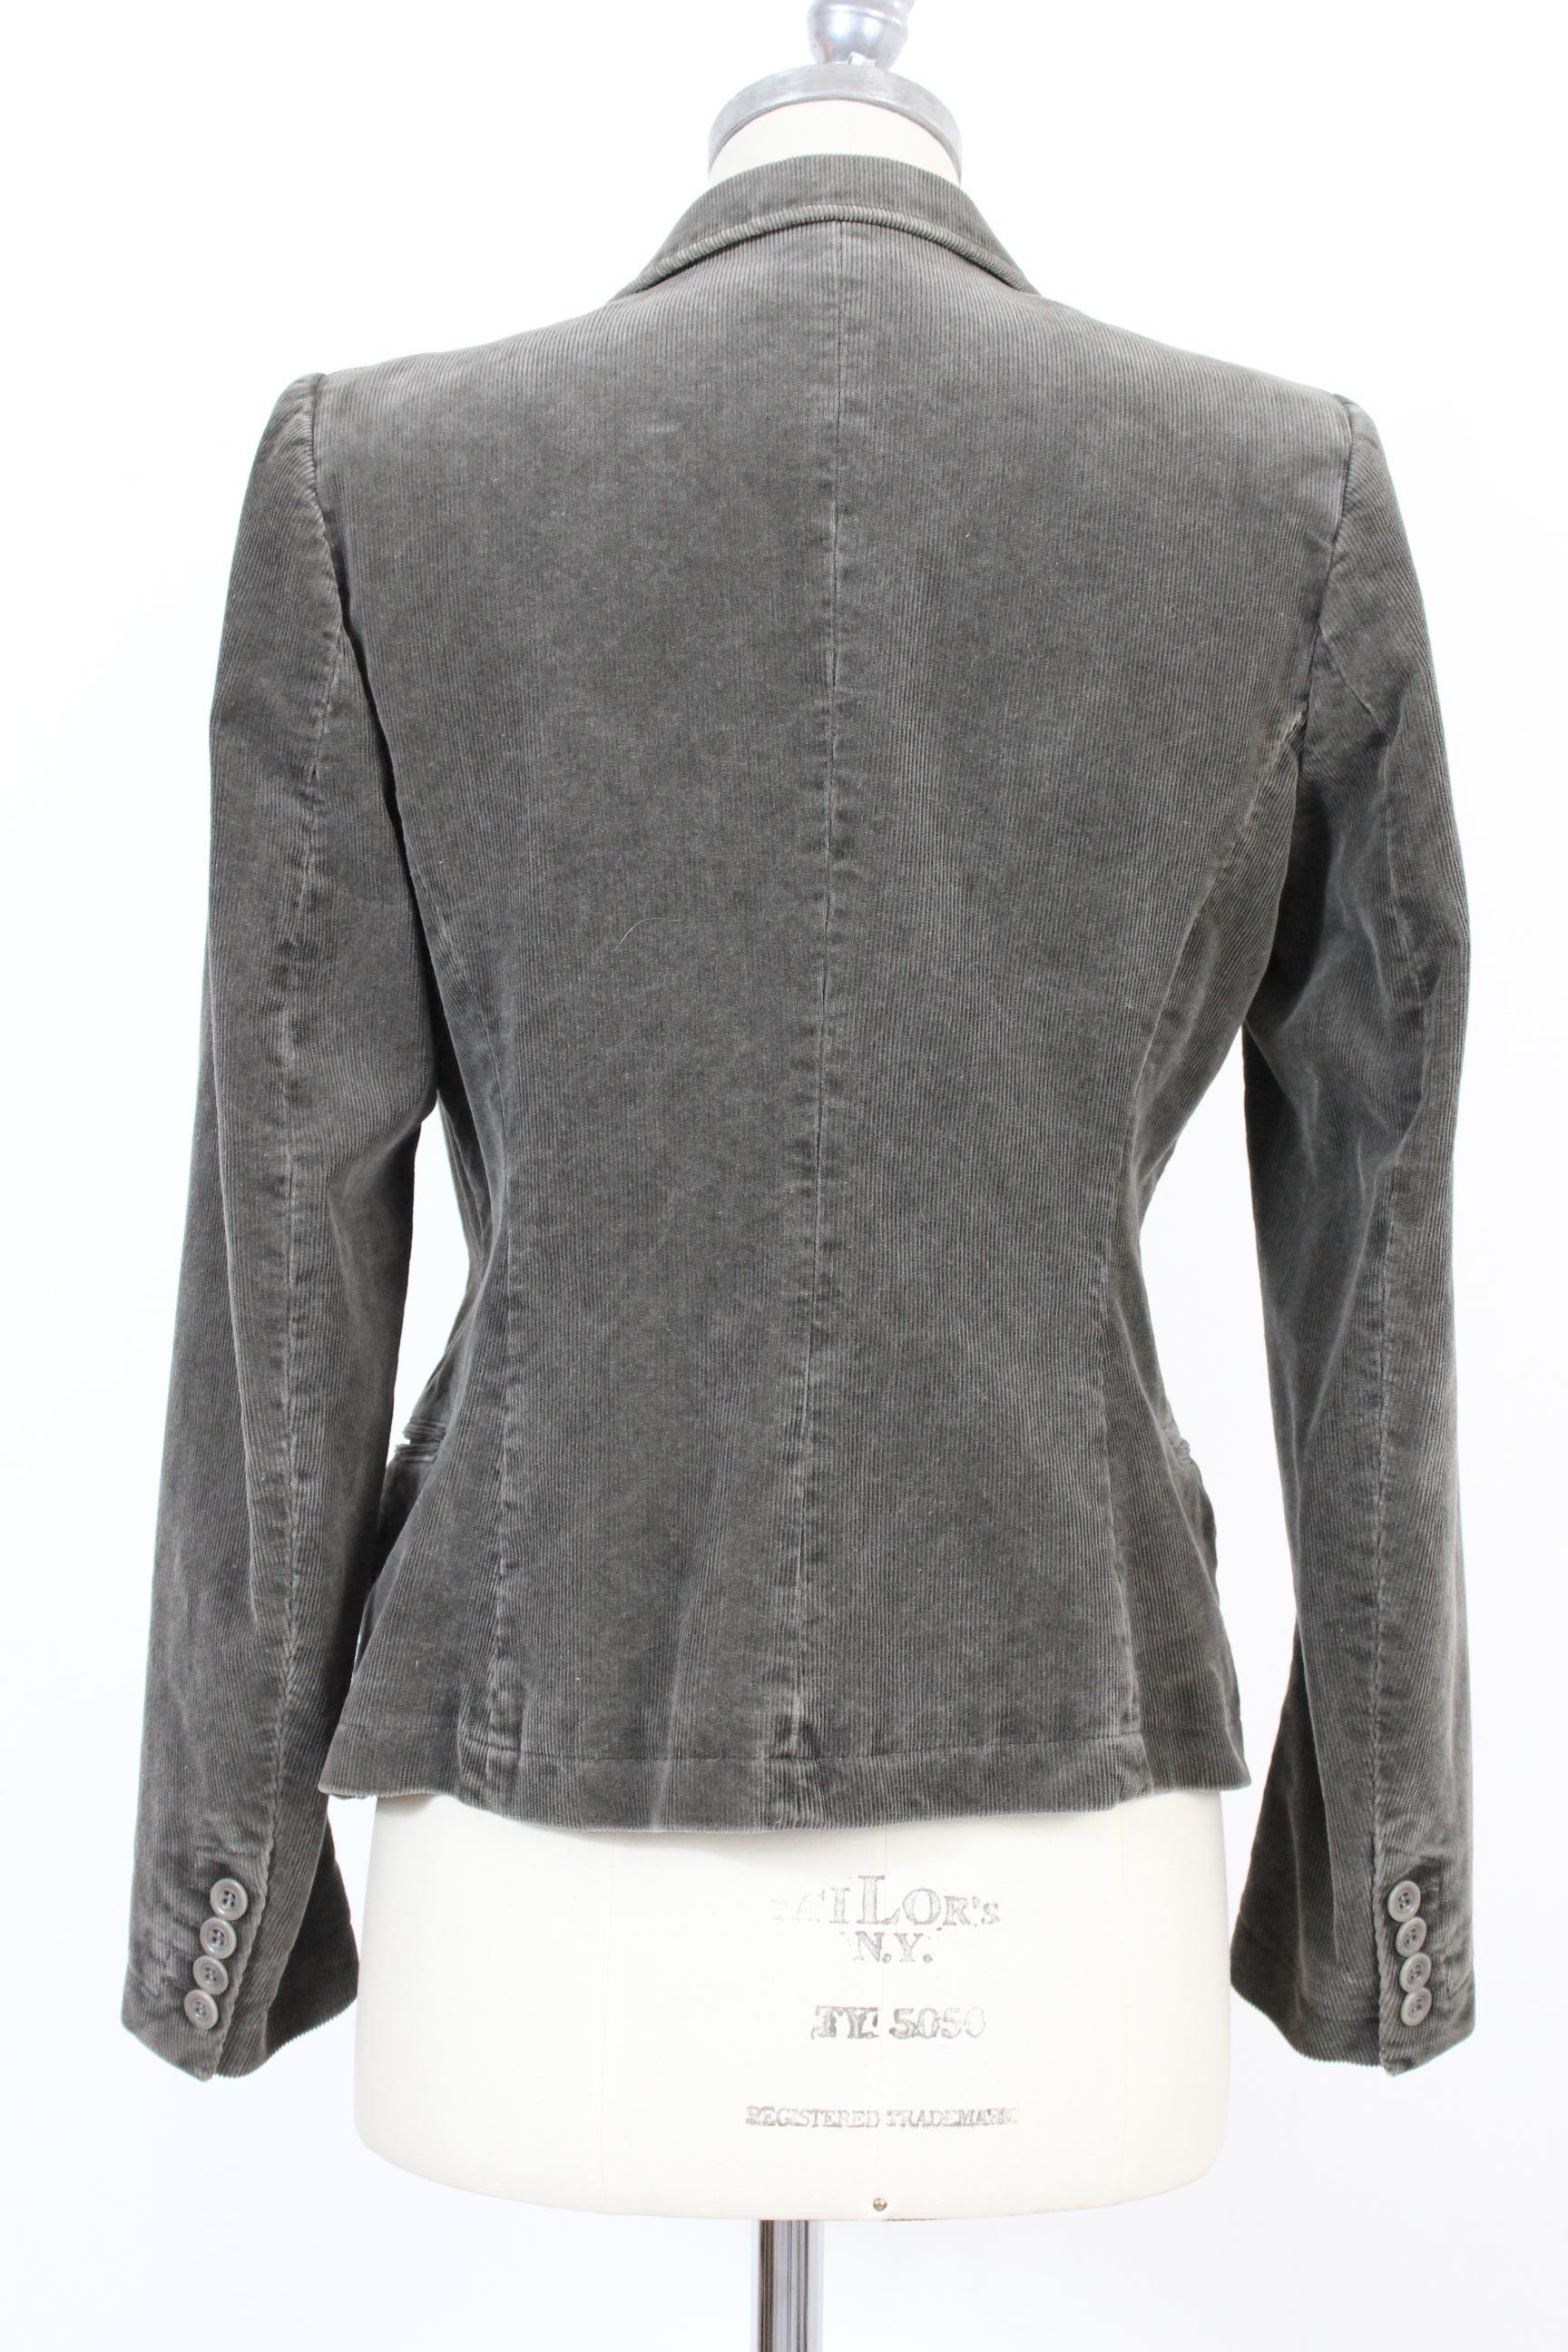 Dries Van Noten vintage 2000s women's jacket. Double-breasted in ribbed color gray, flared, fabric velvet, 100% cotton. Made in Belgium. Excellent vintage condition.

Size: 40 It 6 Us 8 Uk

Shoulder: 40 cm 
Chest / Chest: 48 cm 
Sleeve: 60 cm